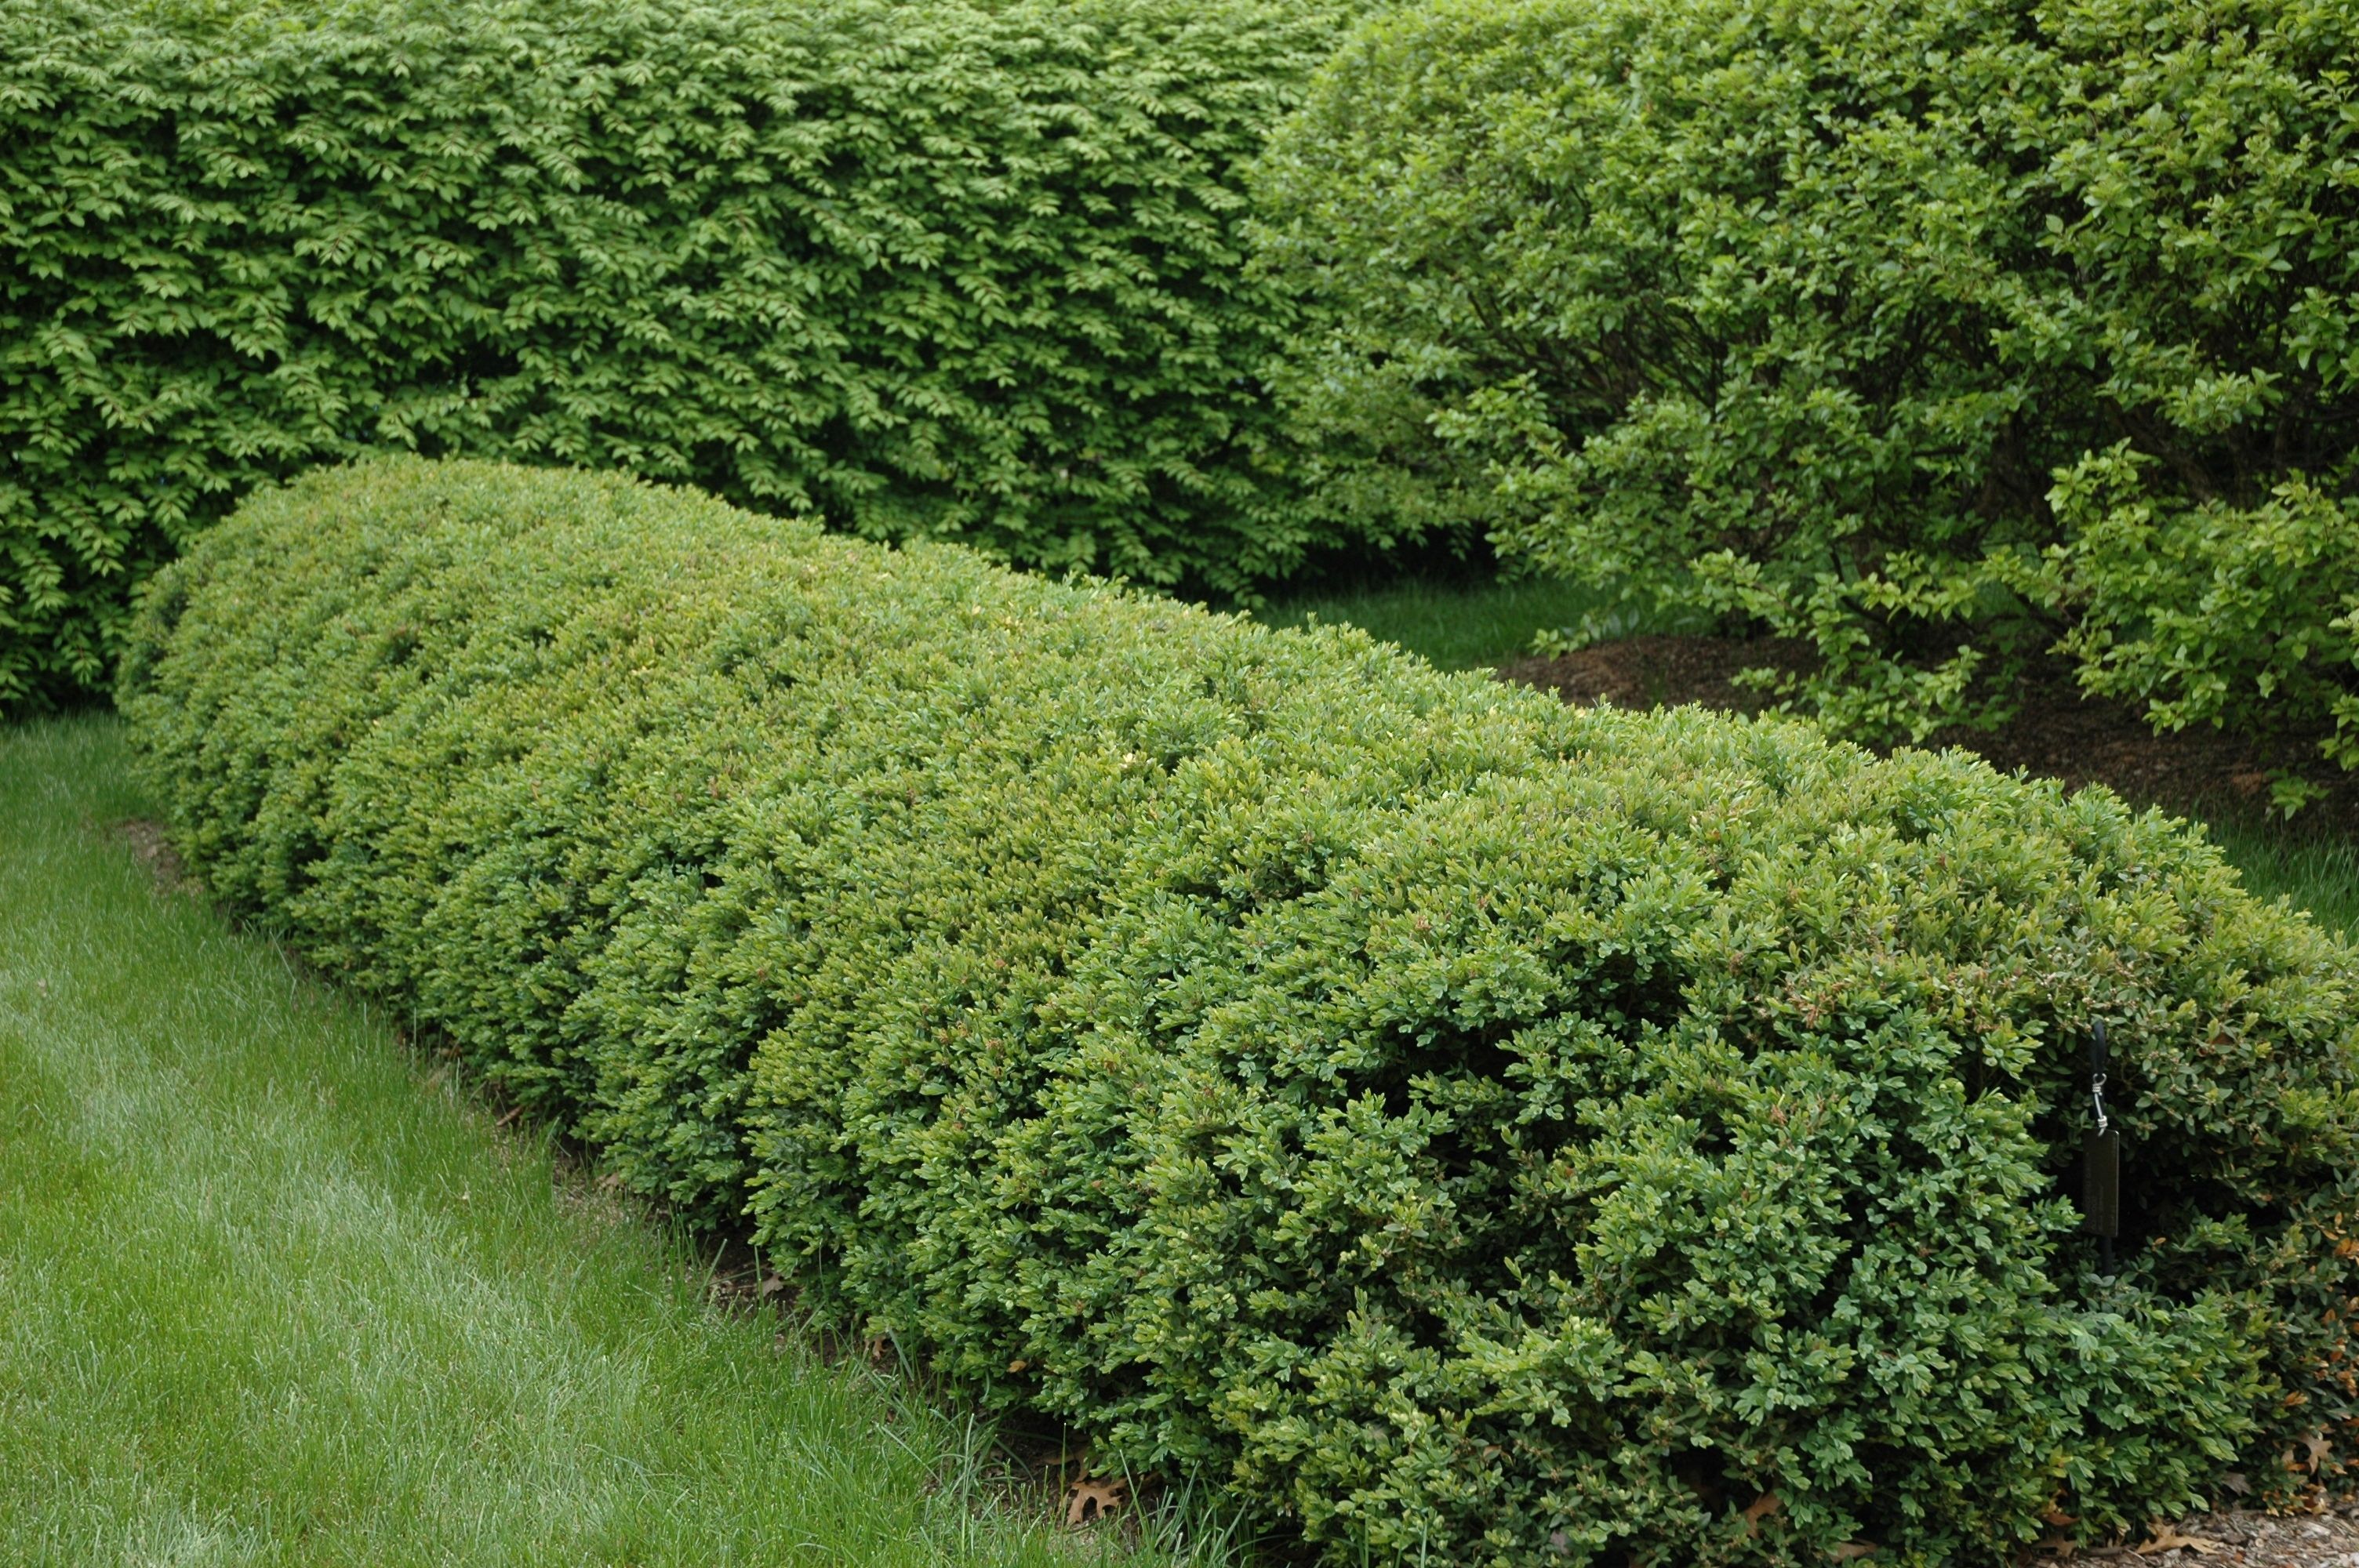 images/plants/buxus/bux-chicagoland-green/bux-chicagoland-green-0001.jpg